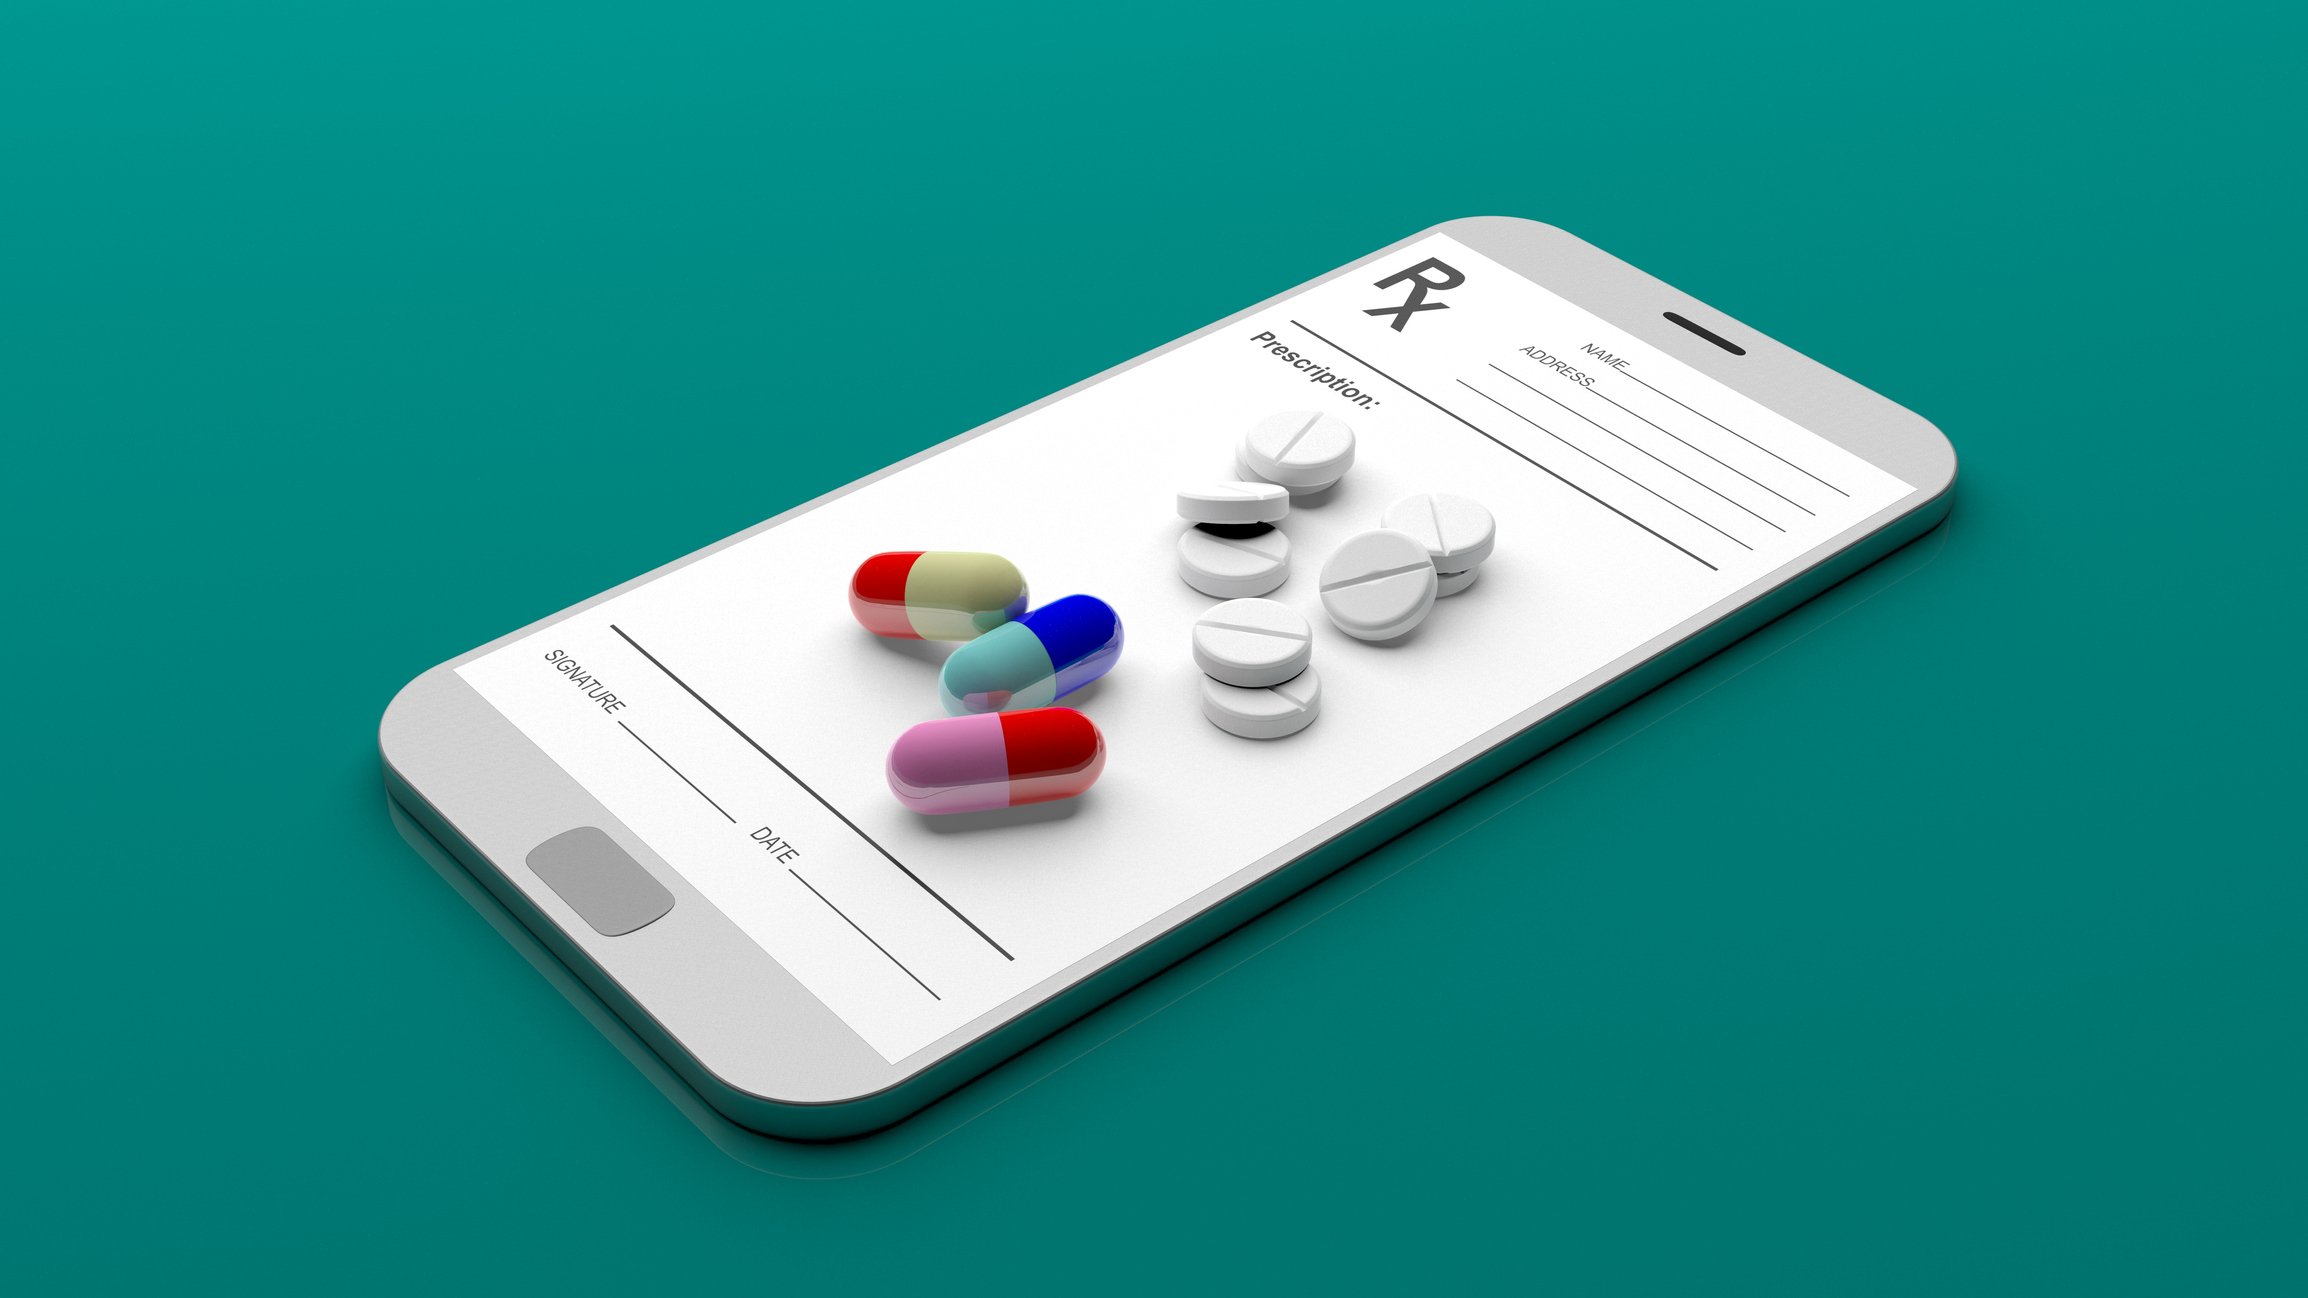   Proposed Telehealth Prescribing Policies Hurt Those with Chronic Illnesses   The DEA’s proposed rules will have far-reaching, unintended consequences impacting Americans’ ability to use telehealth to receive medications.   Learn more.  